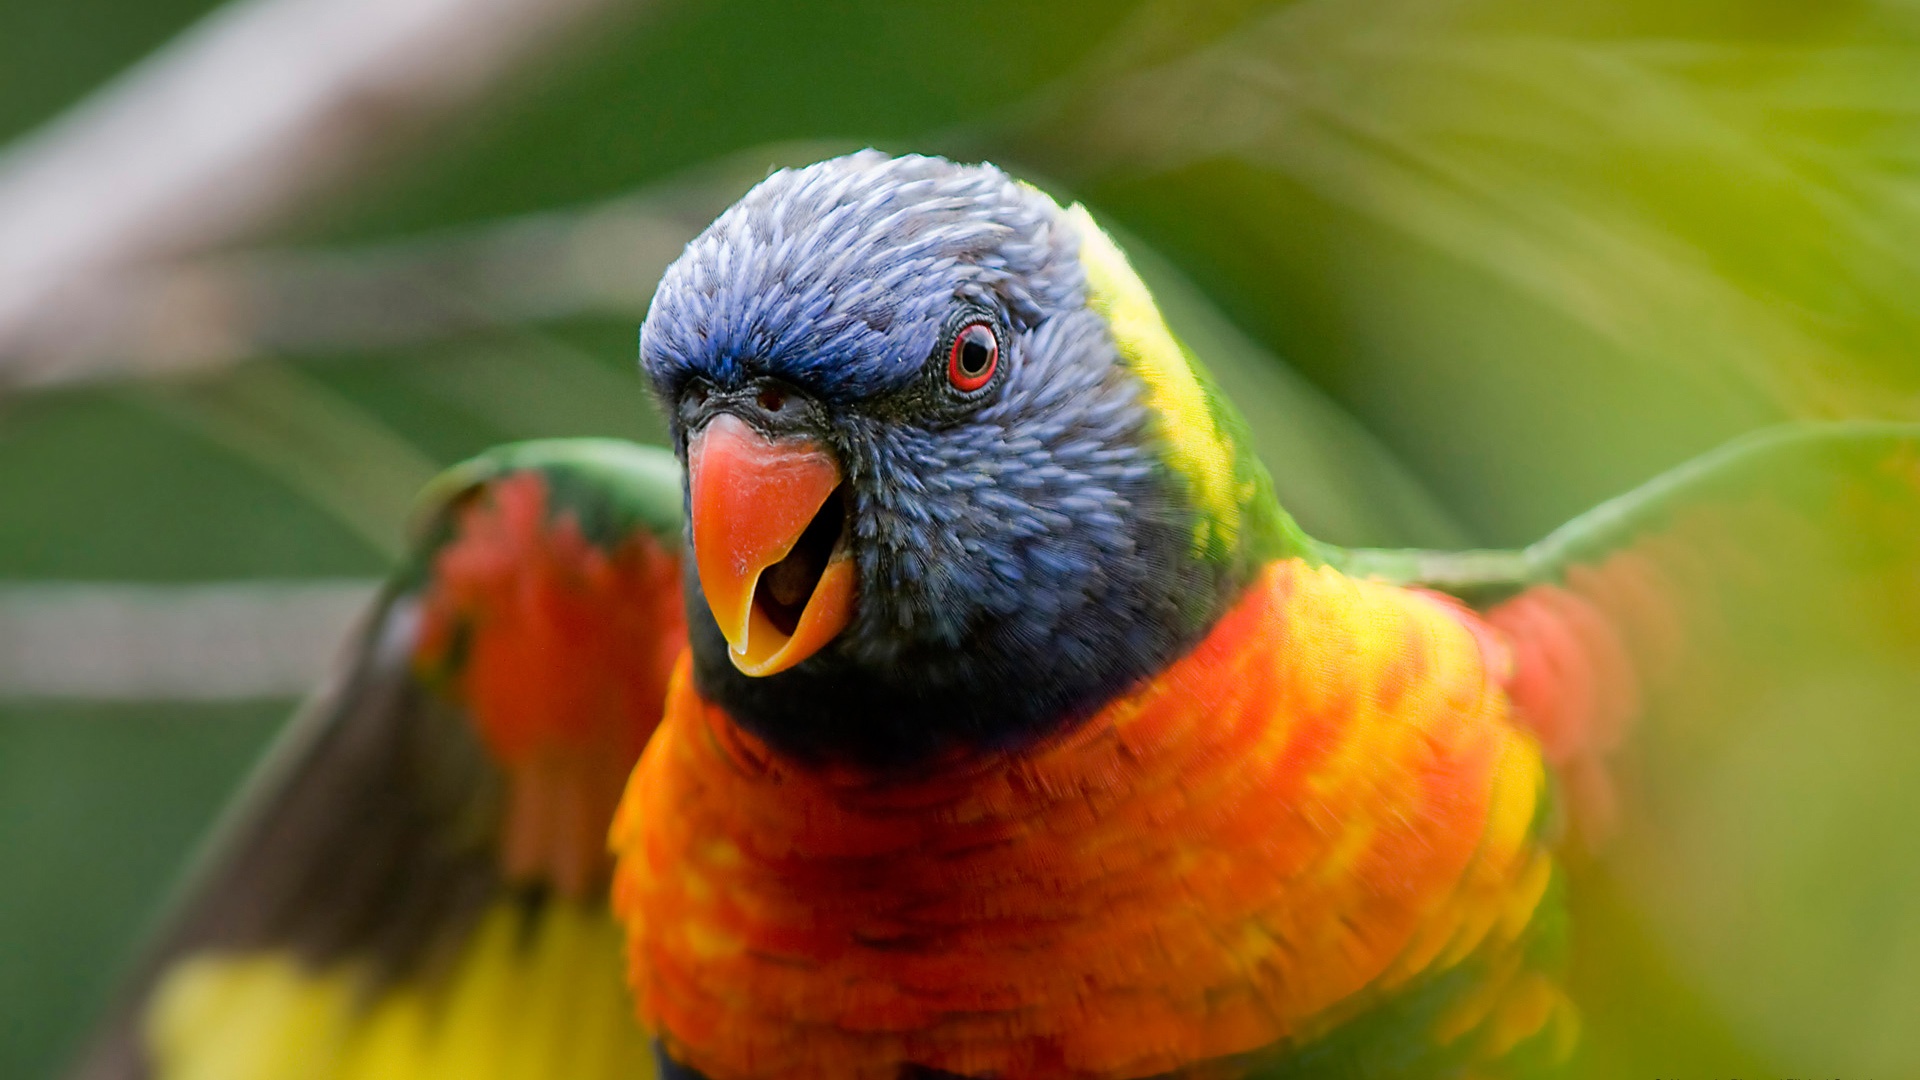 Full Hd Wallpaper Angry Parrot Bird Variegated - Imagenes Con Mucha Resolucion , HD Wallpaper & Backgrounds